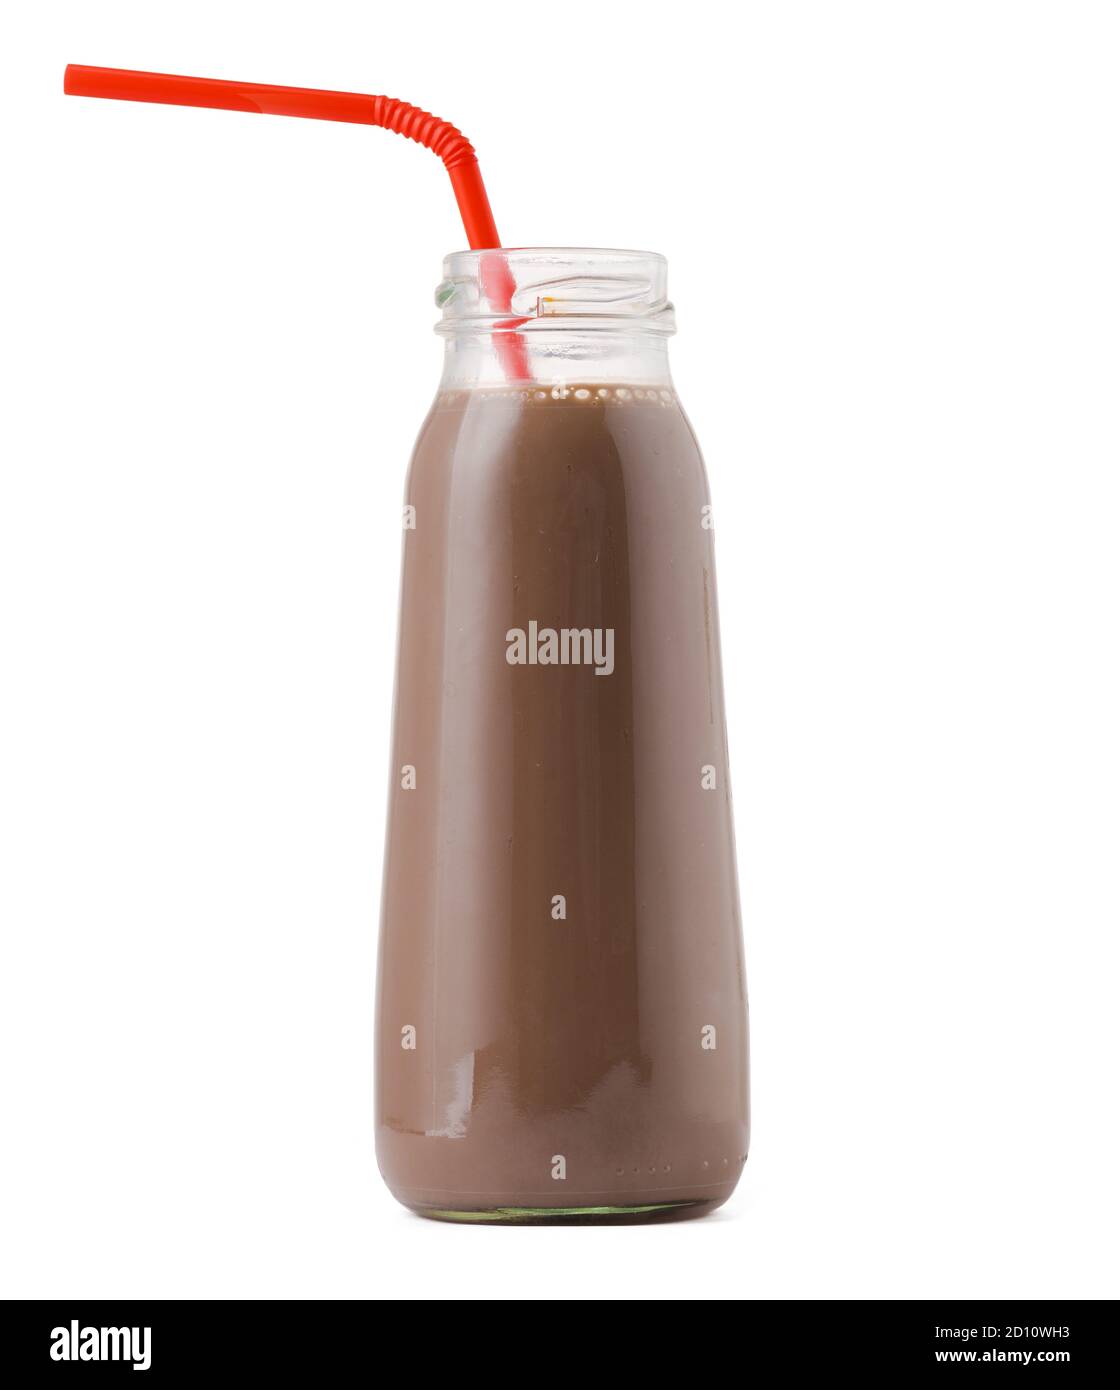 https://c8.alamy.com/comp/2D10WH3/glass-cup-of-chocolate-milk-with-a-straw-isolated-on-white-2D10WH3.jpg